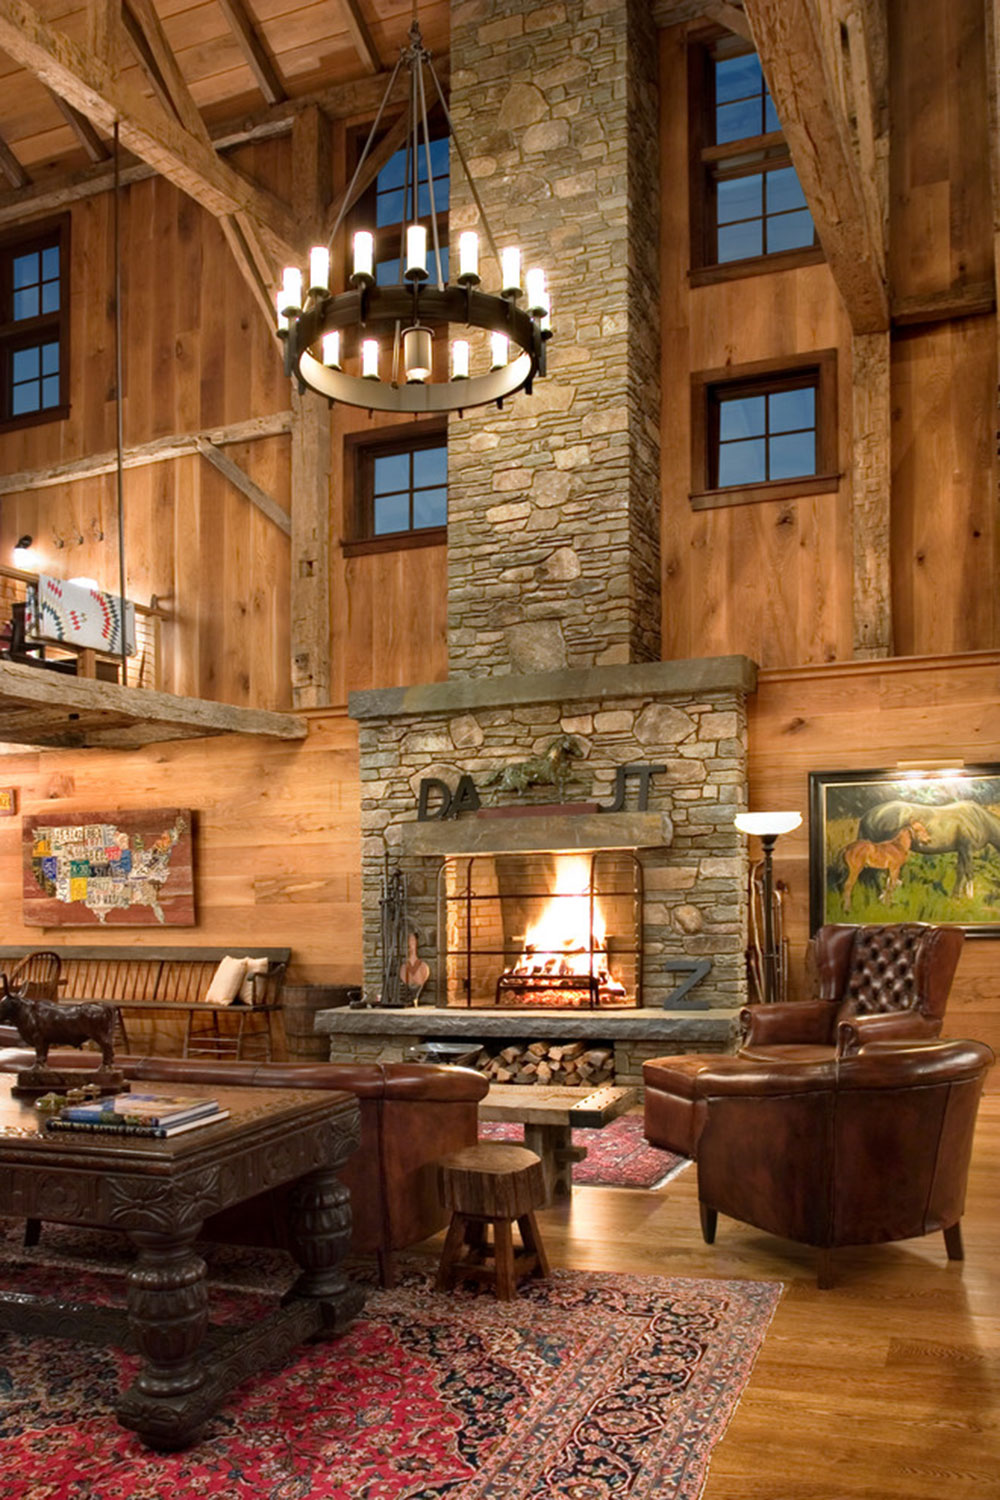 Four-Barns-Farm-by-Gleicher-Design-Architecture-and-Interiors Stone Fireplace Ideas. How to Decorate a Stone Fireplace.